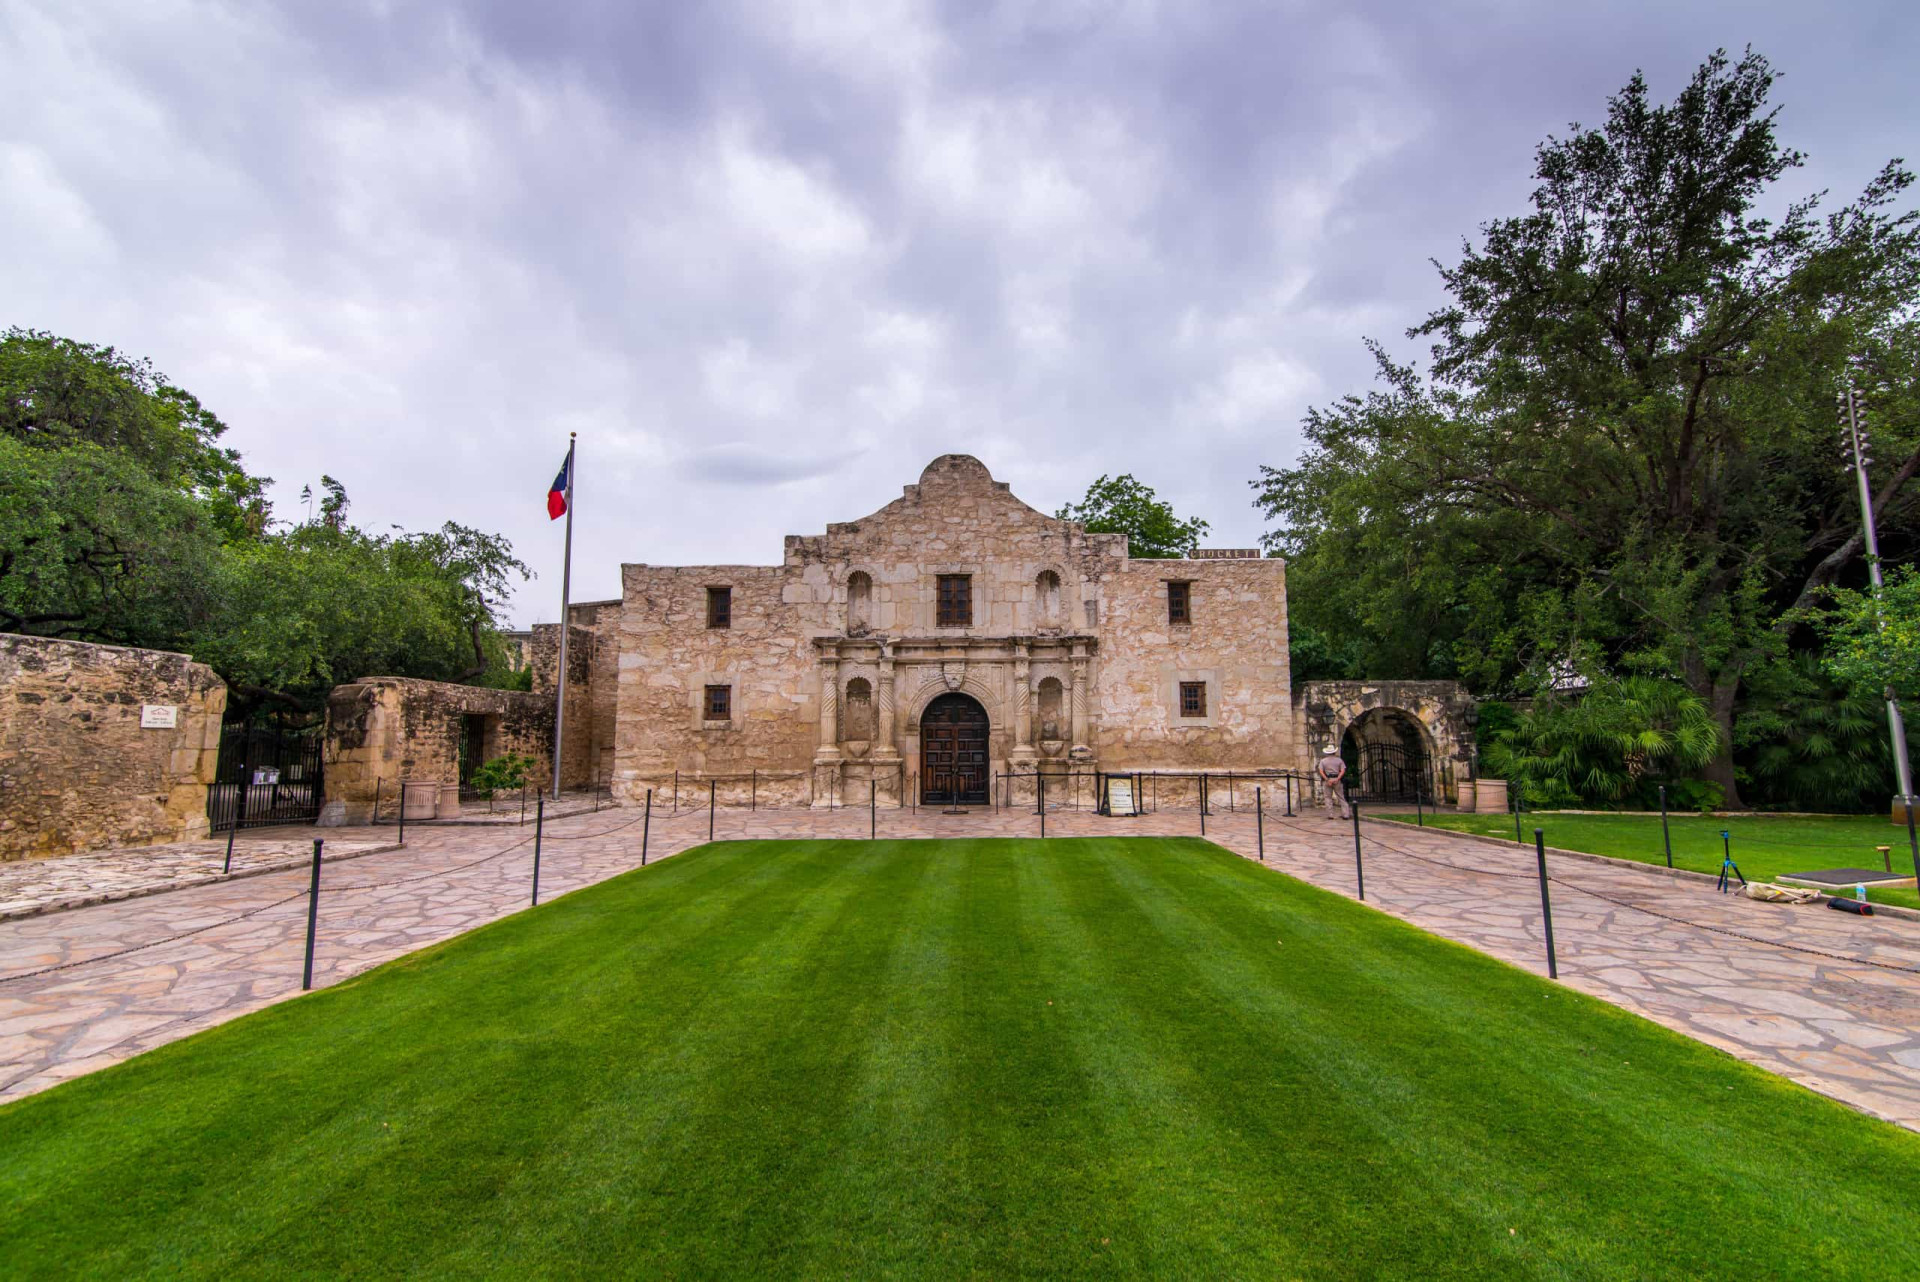 <p>The defense by a handful of Texans and Tejanos of the Alamo Mission during a 13-day siege in 1836 by Mexican troops led by Santa Ana remains one of the defining moments in American history. The Alamo Mission, located in San Antonio, still stands and today serves as a museum.</p><p><a href="https://www.msn.com/en-za/community/channel/vid-7xx8mnucu55yw63we9va2gwr7uihbxwc68fxqp25x6tg4ftibpra?cvid=94631541bc0f4f89bfd59158d696ad7e">Follow us and access great exclusive content every day</a></p>